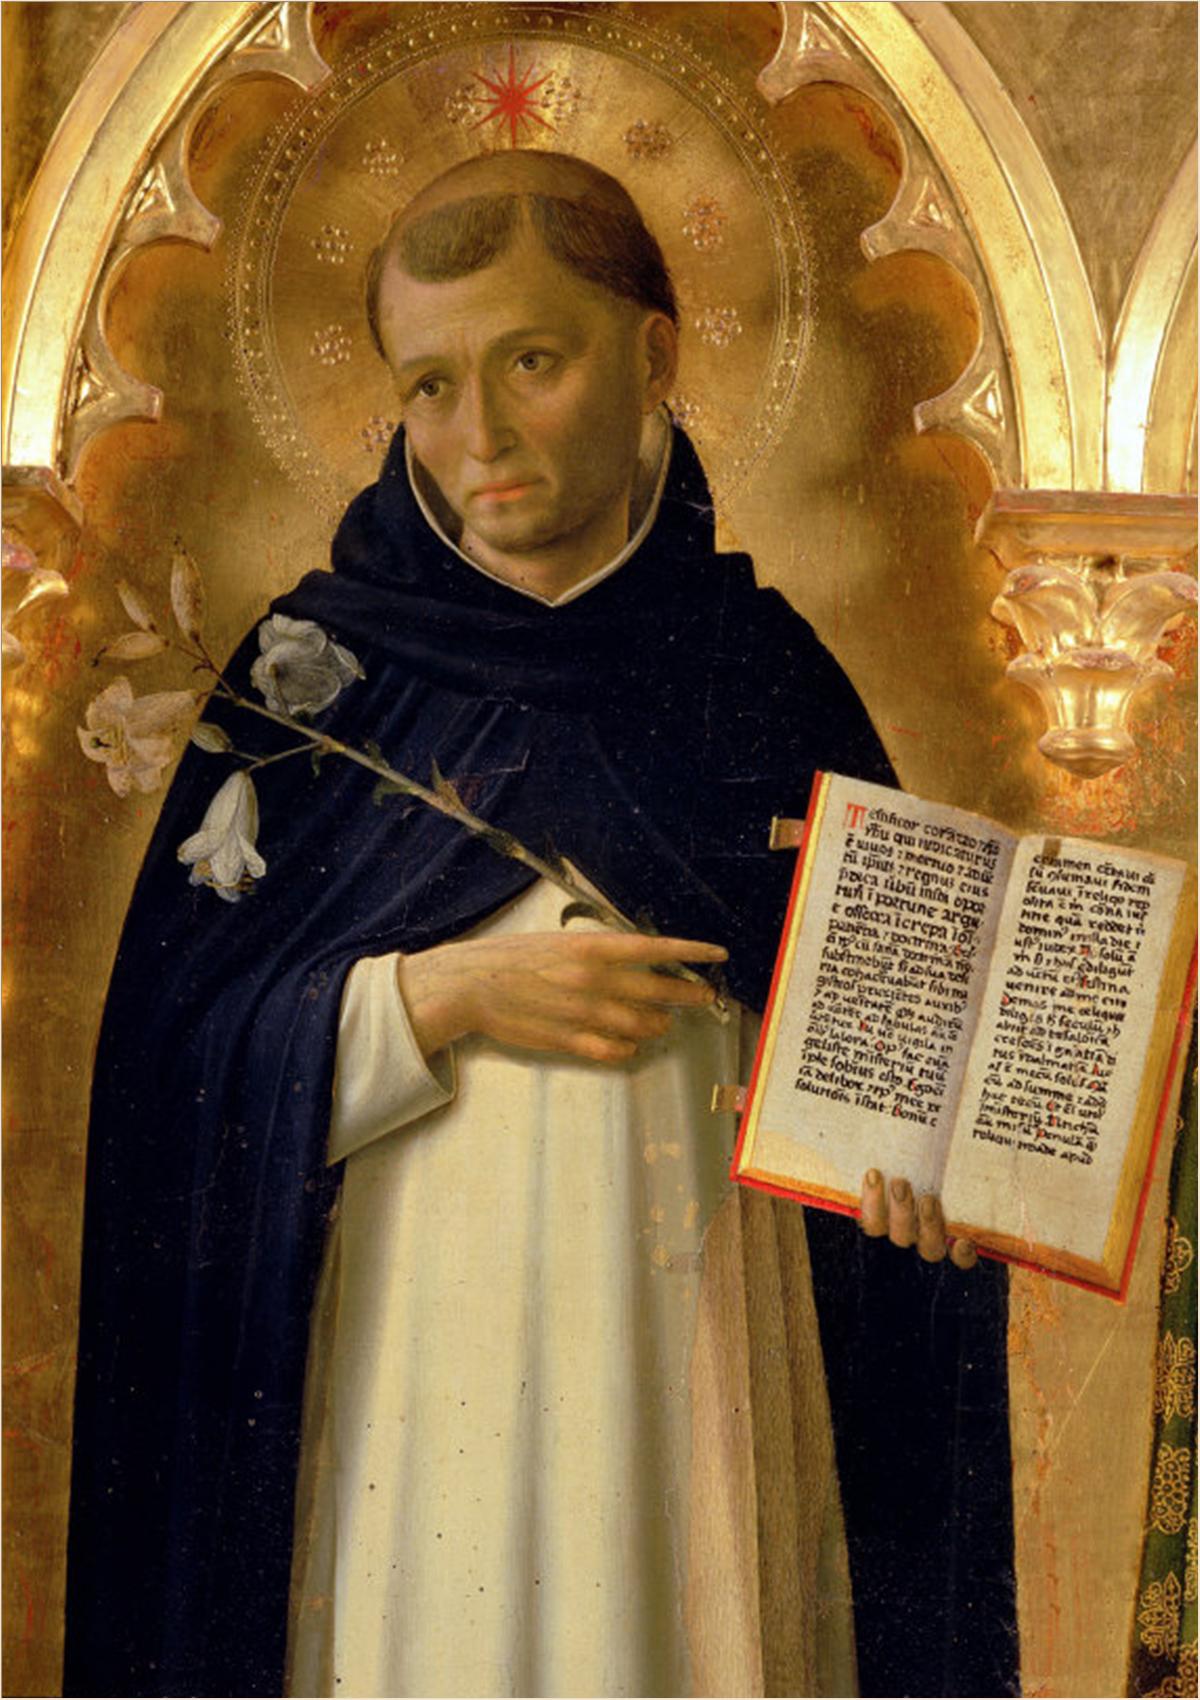 St. Dominic and the Origins of the Rosary